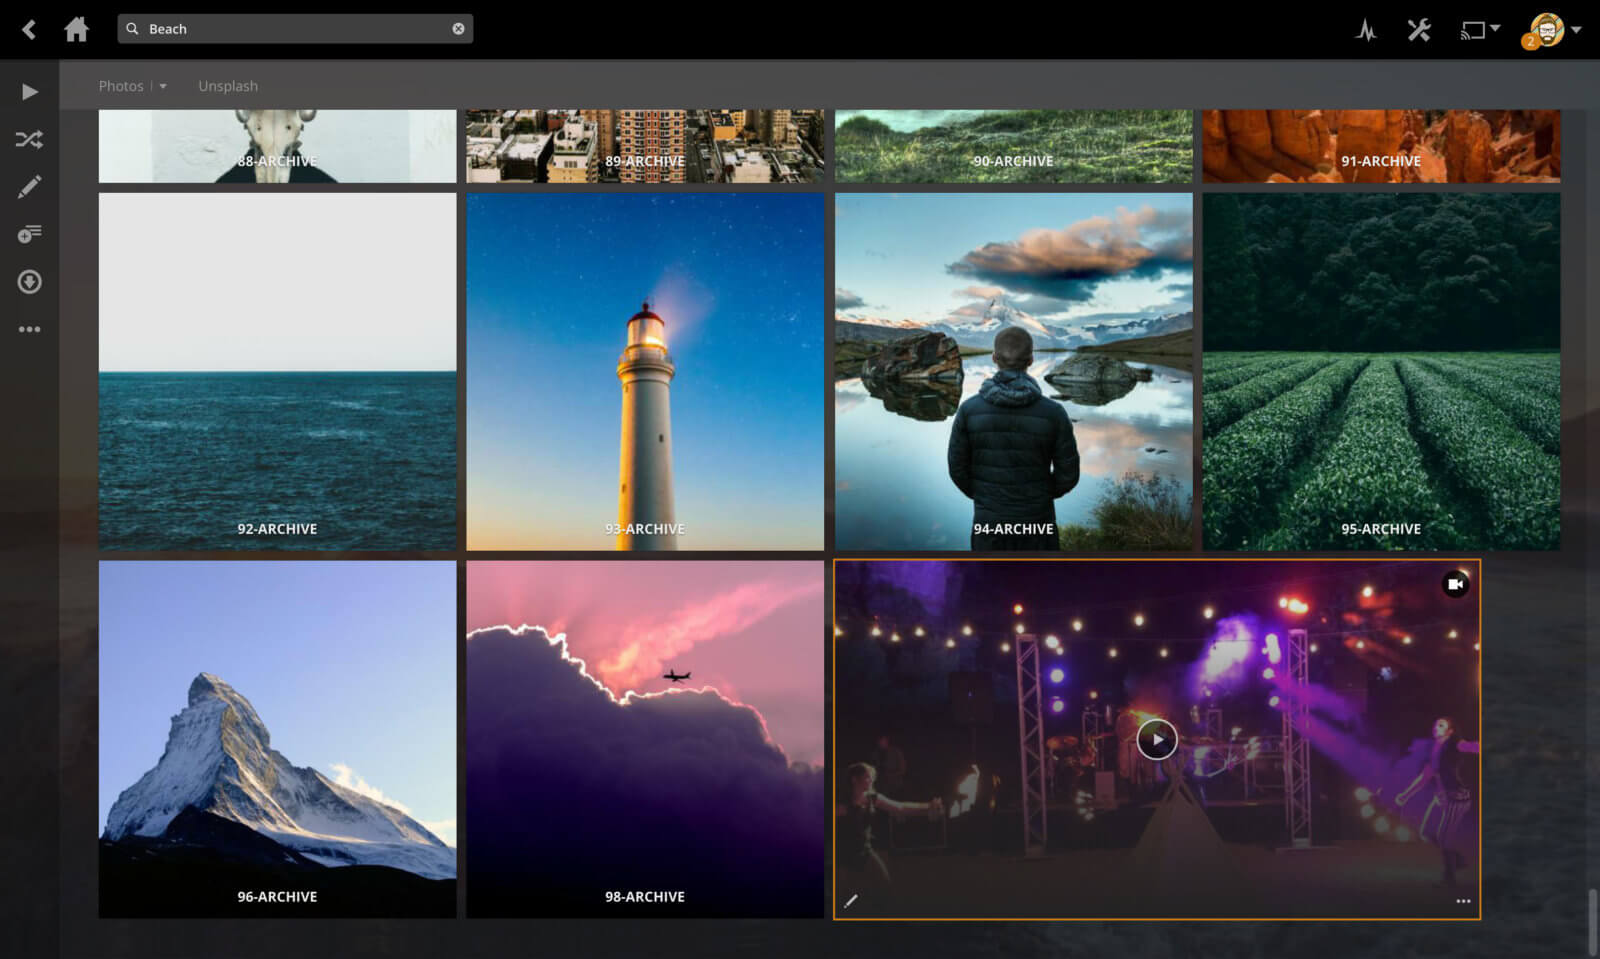 Plex overhauls photo features with automatic image tagging, design ...